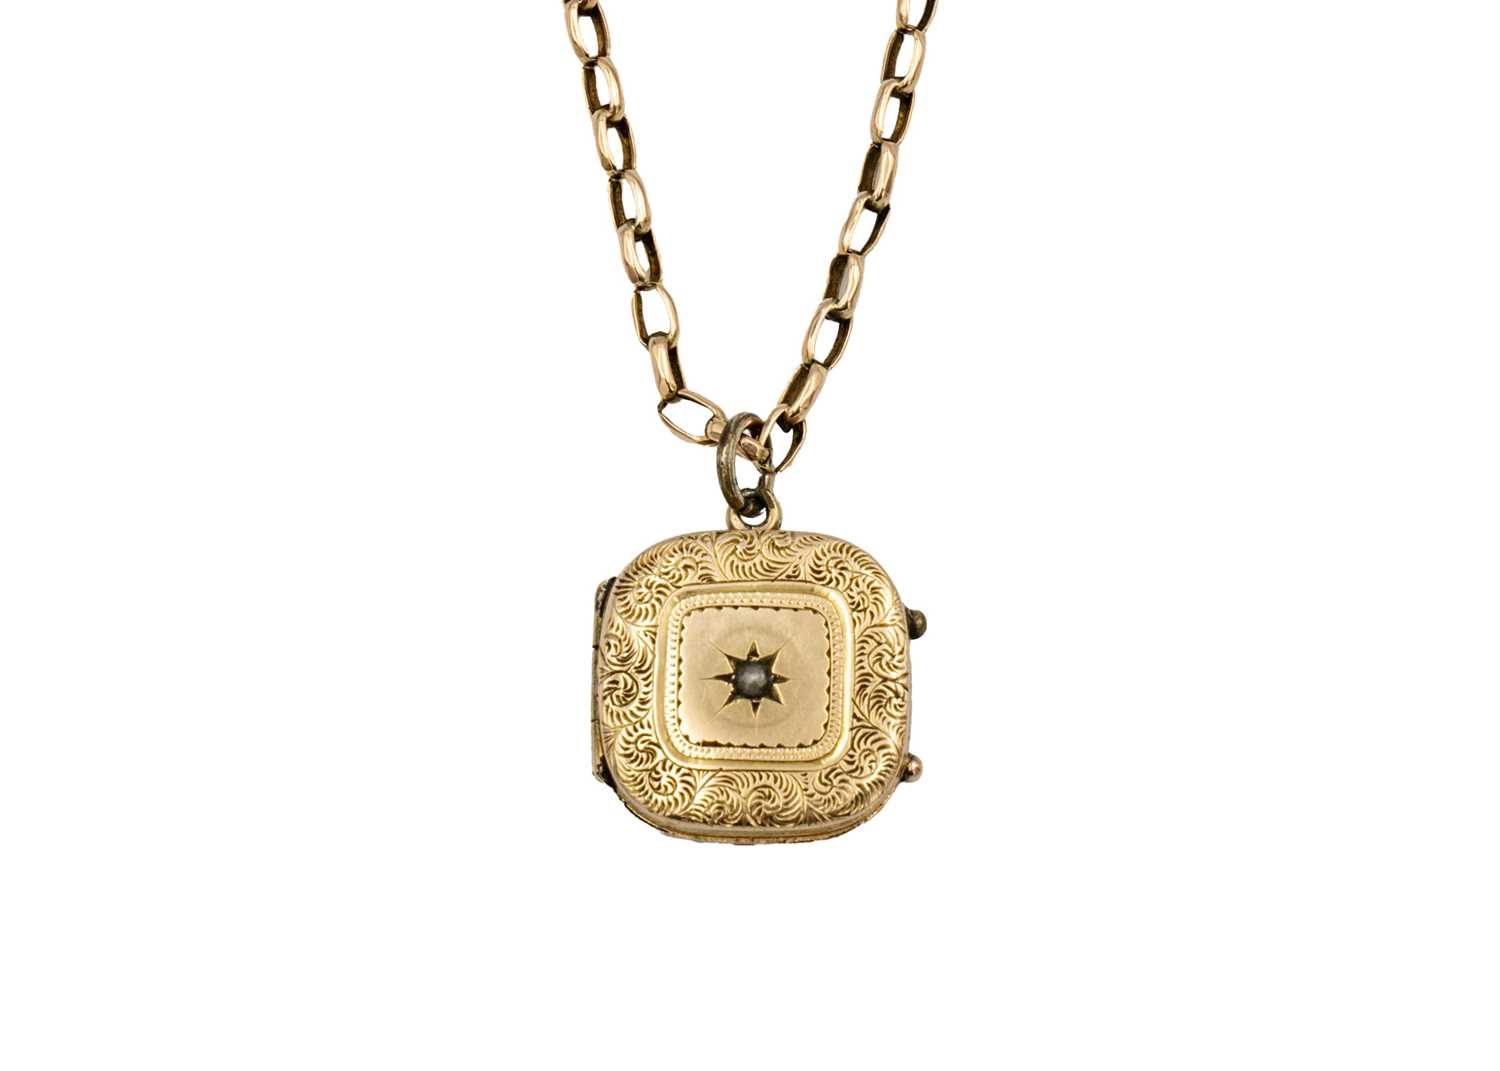 A 9ct early 20th century locket pendant on 9ct belcher link necklace.